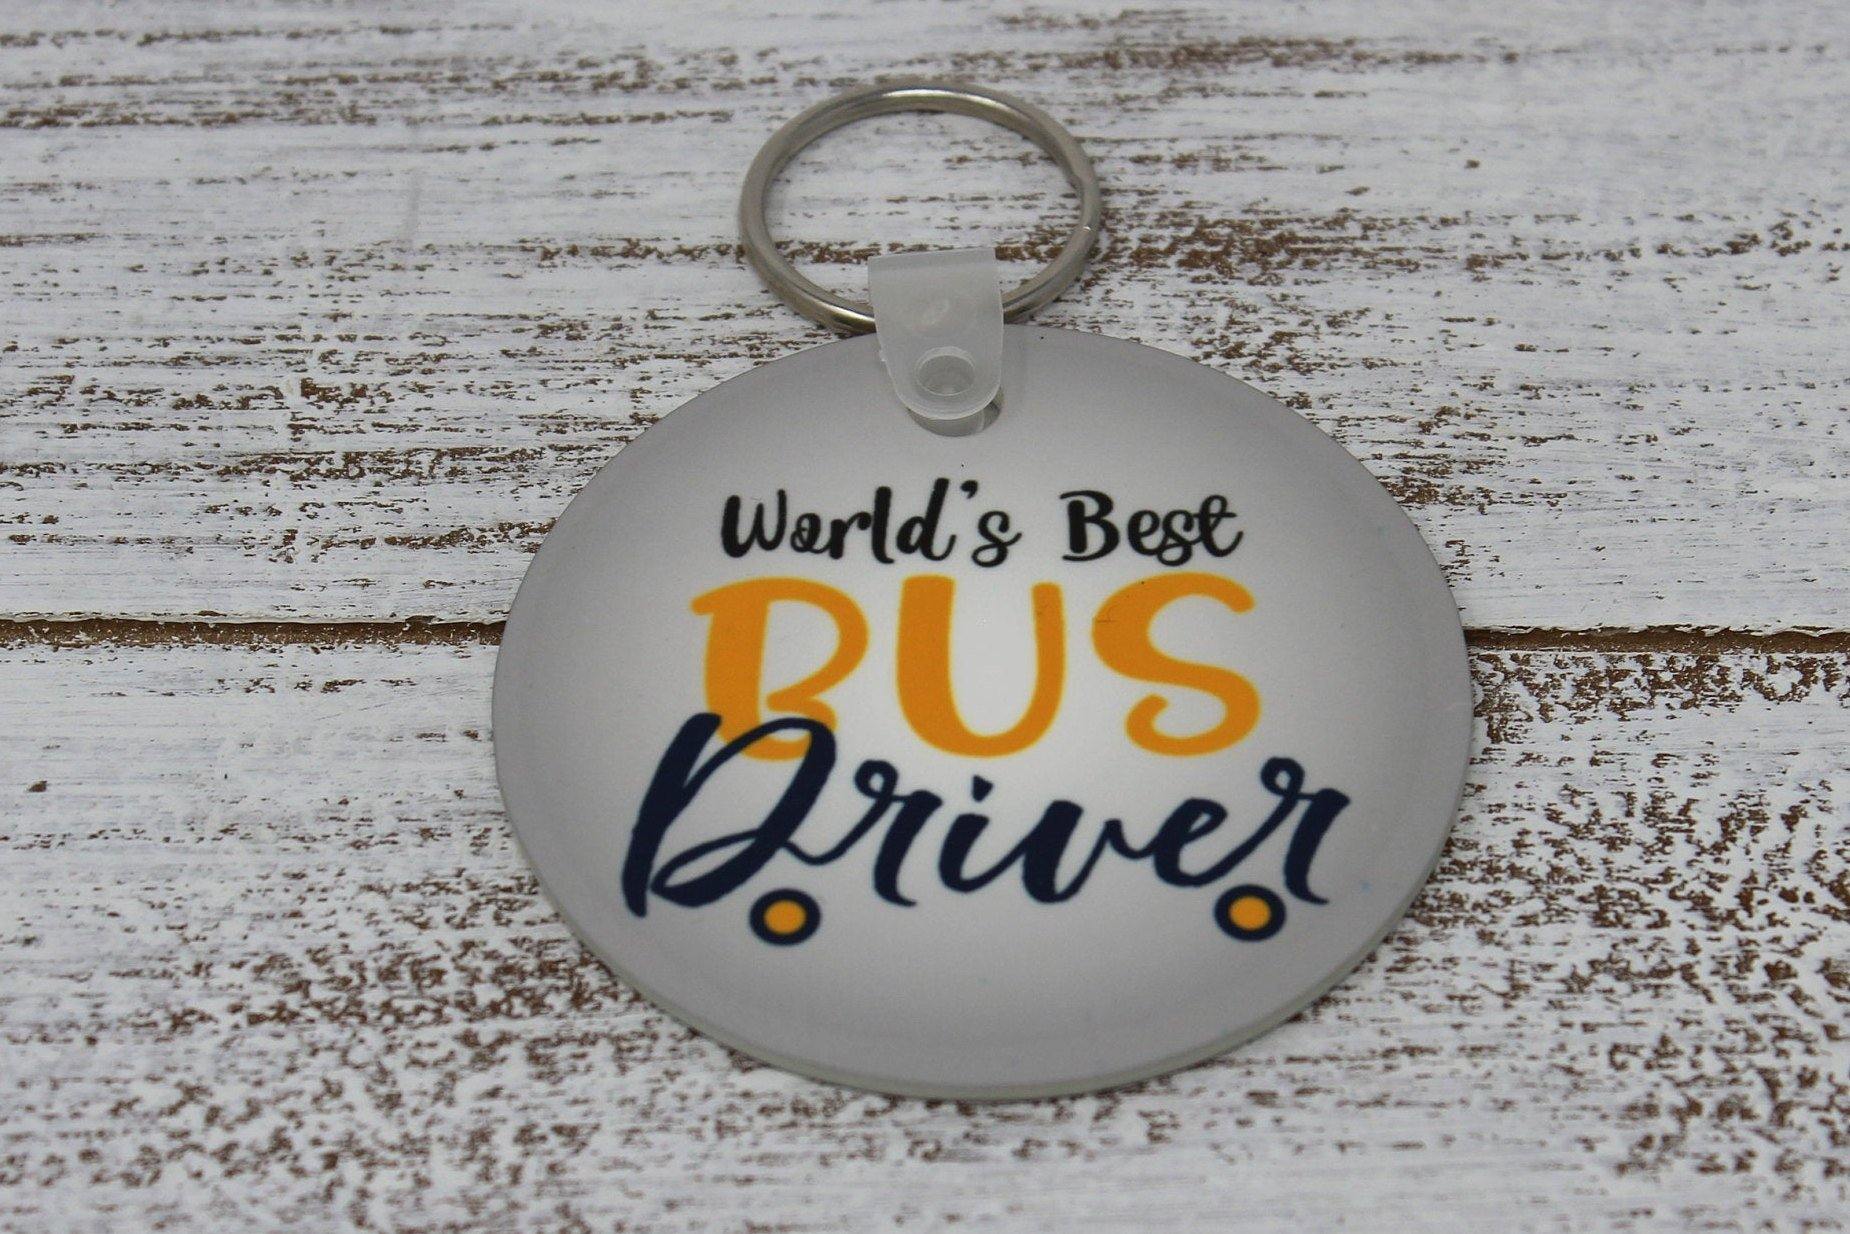 Monogrammed Key Chain | Personalized Key Chain | Bus Driver - This & That Solutions - Monogrammed Key Chain | Personalized Key Chain | Bus Driver - Personalized Gifts & Custom Home Decor